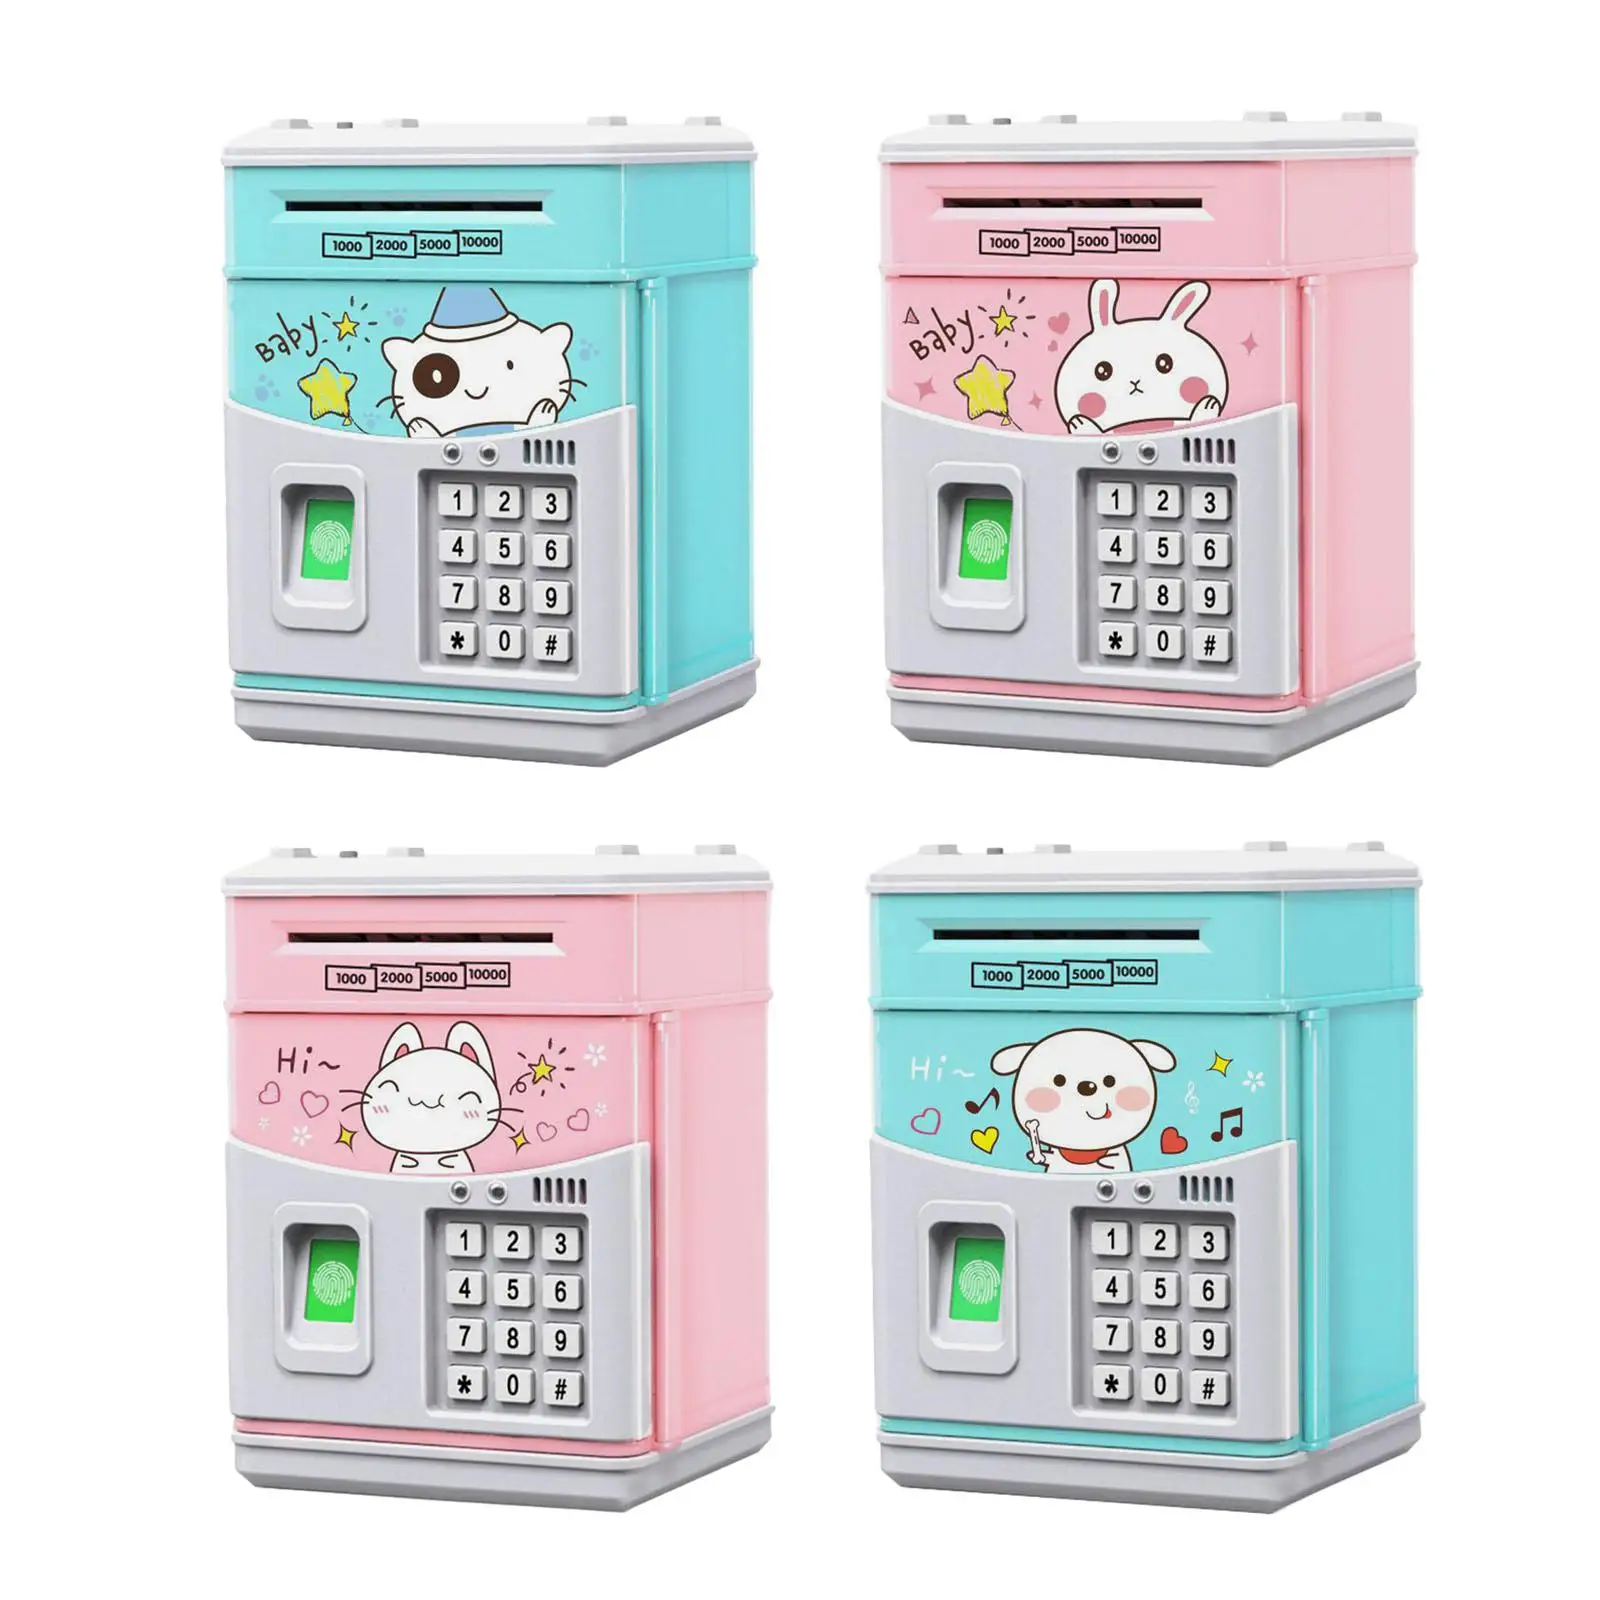 ATM Piggy Money Password Protection Automatic Door Opening for Boys Girls Kids Birthday Gifts